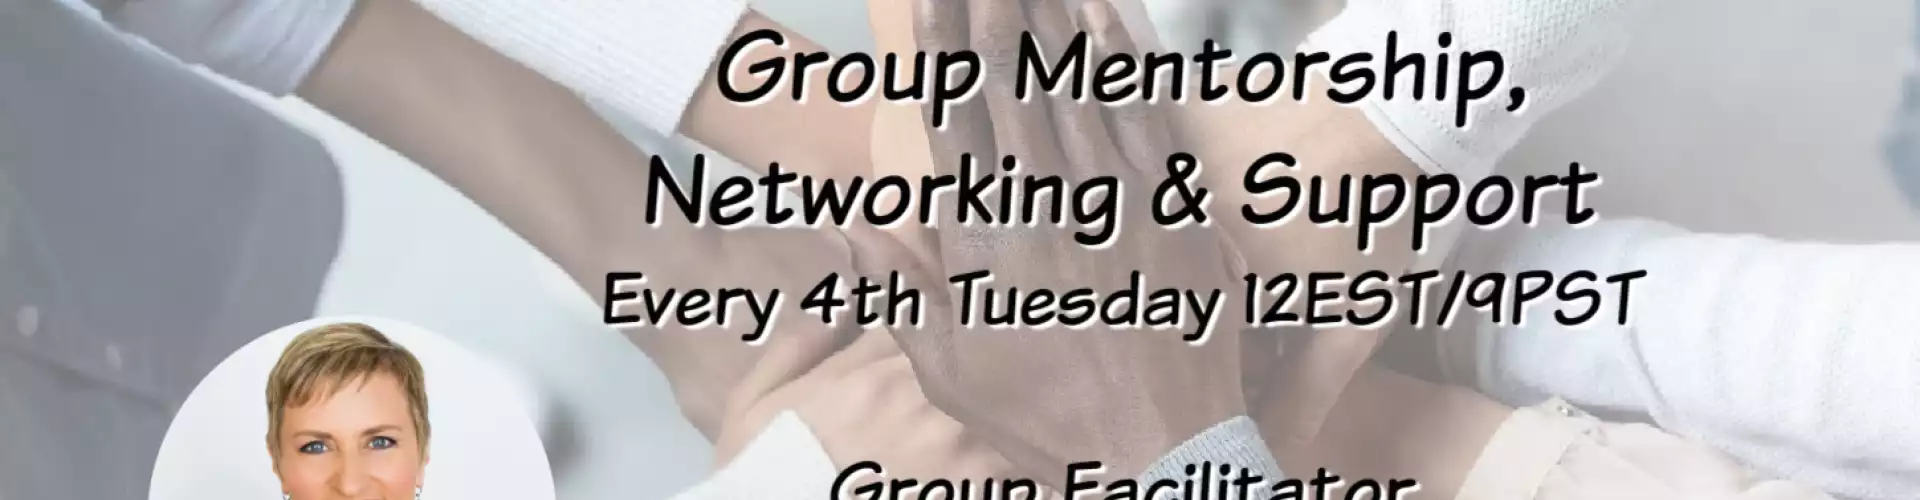 Group Mentorship, Networking & Support March 2021